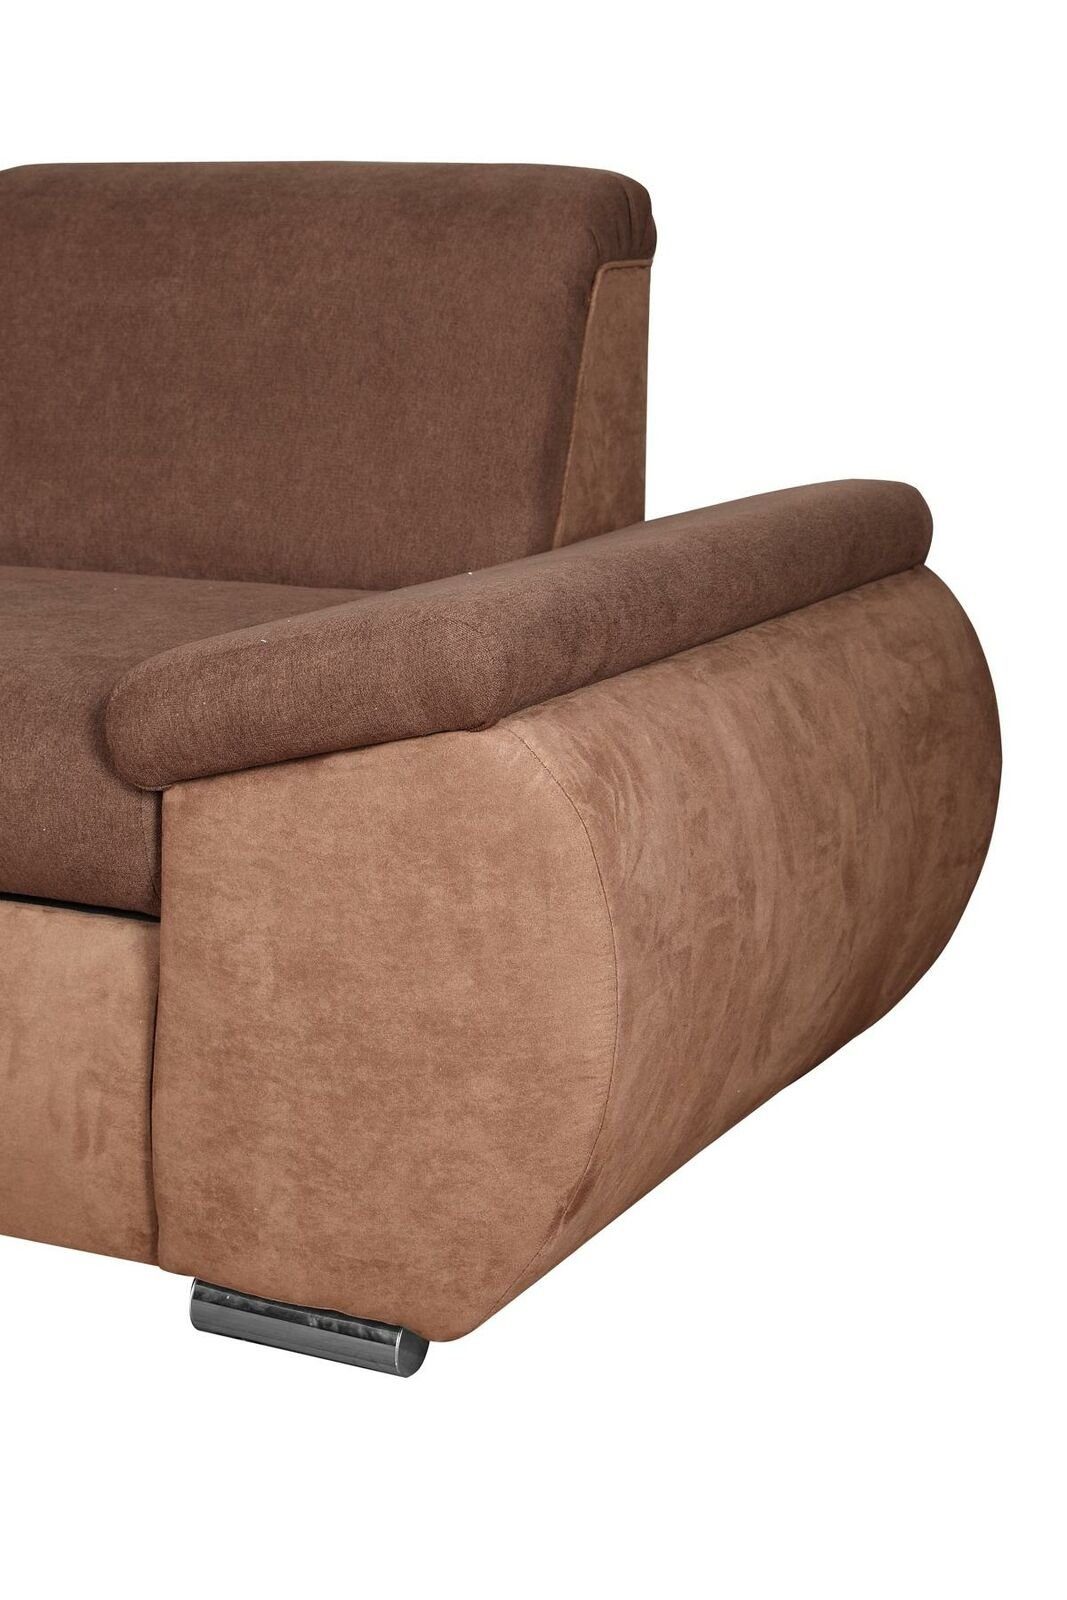 Design L-Form Stoff Europe Ecksofa JVmoebel Sofa Made Bettfunktion Sofa Couch, Couch mit in Braunes